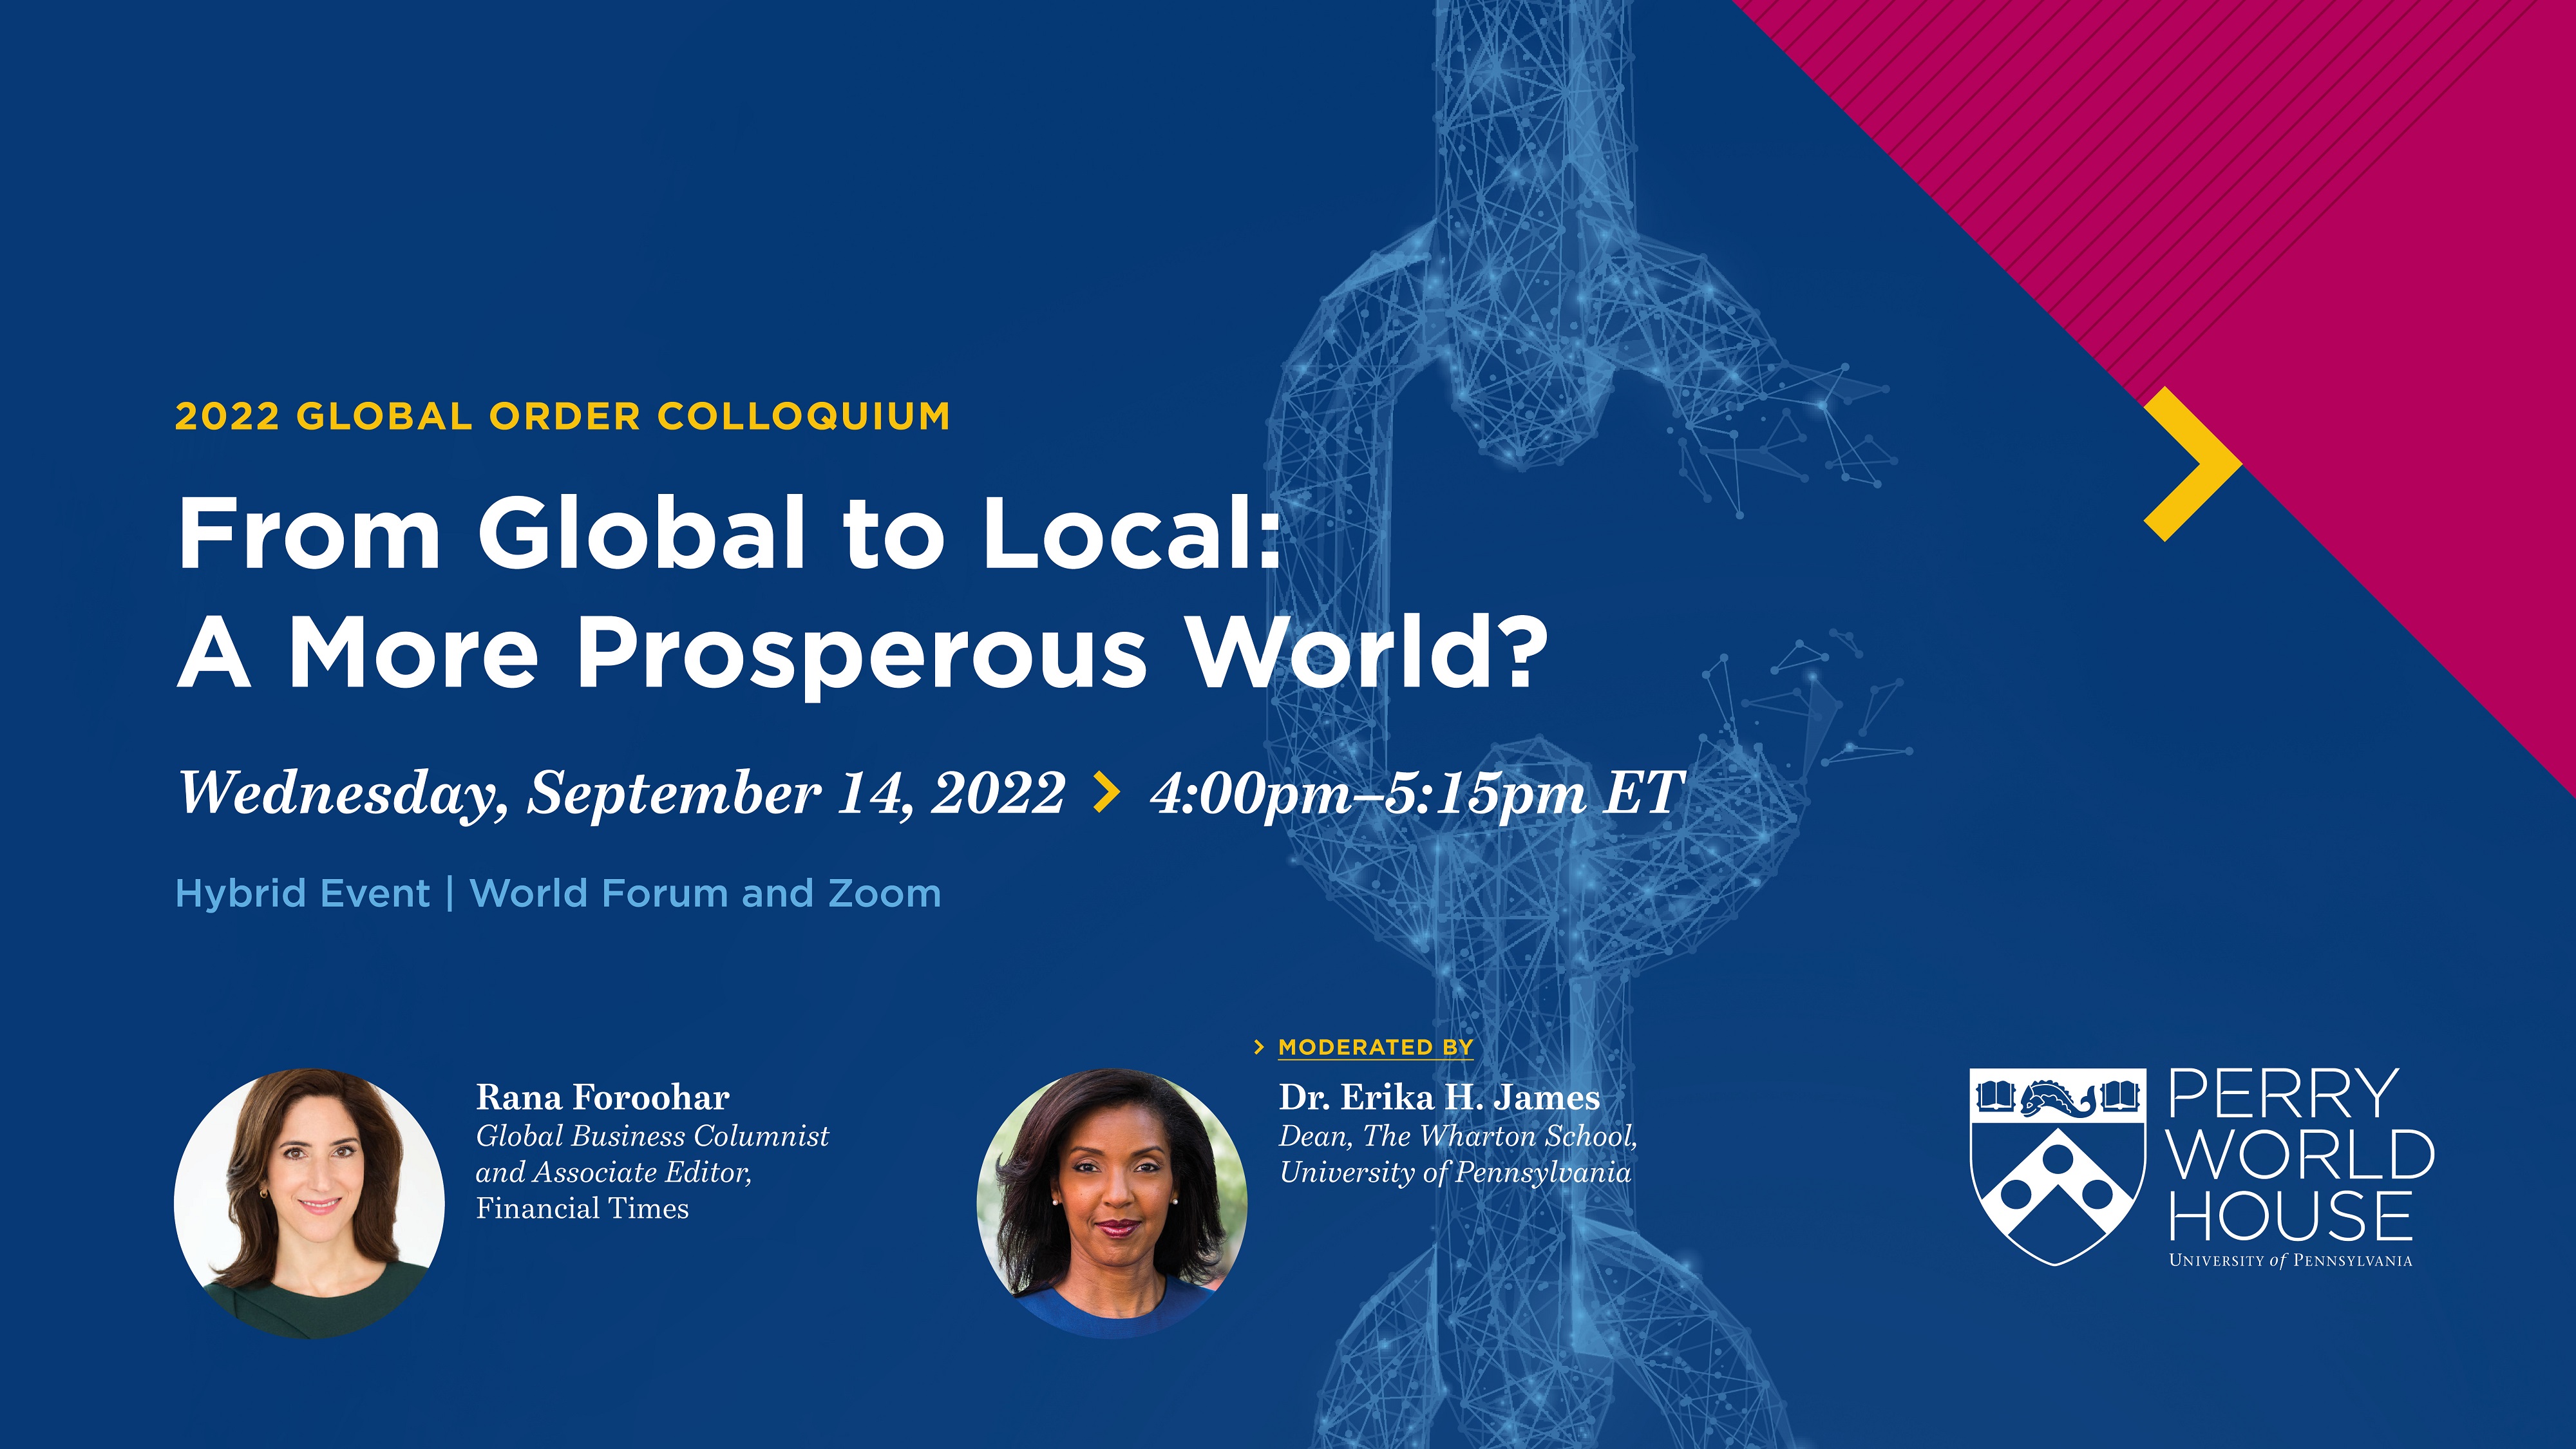 From Global to Local: A More Prosperous World? with Rana Foroohar and Erika H. James